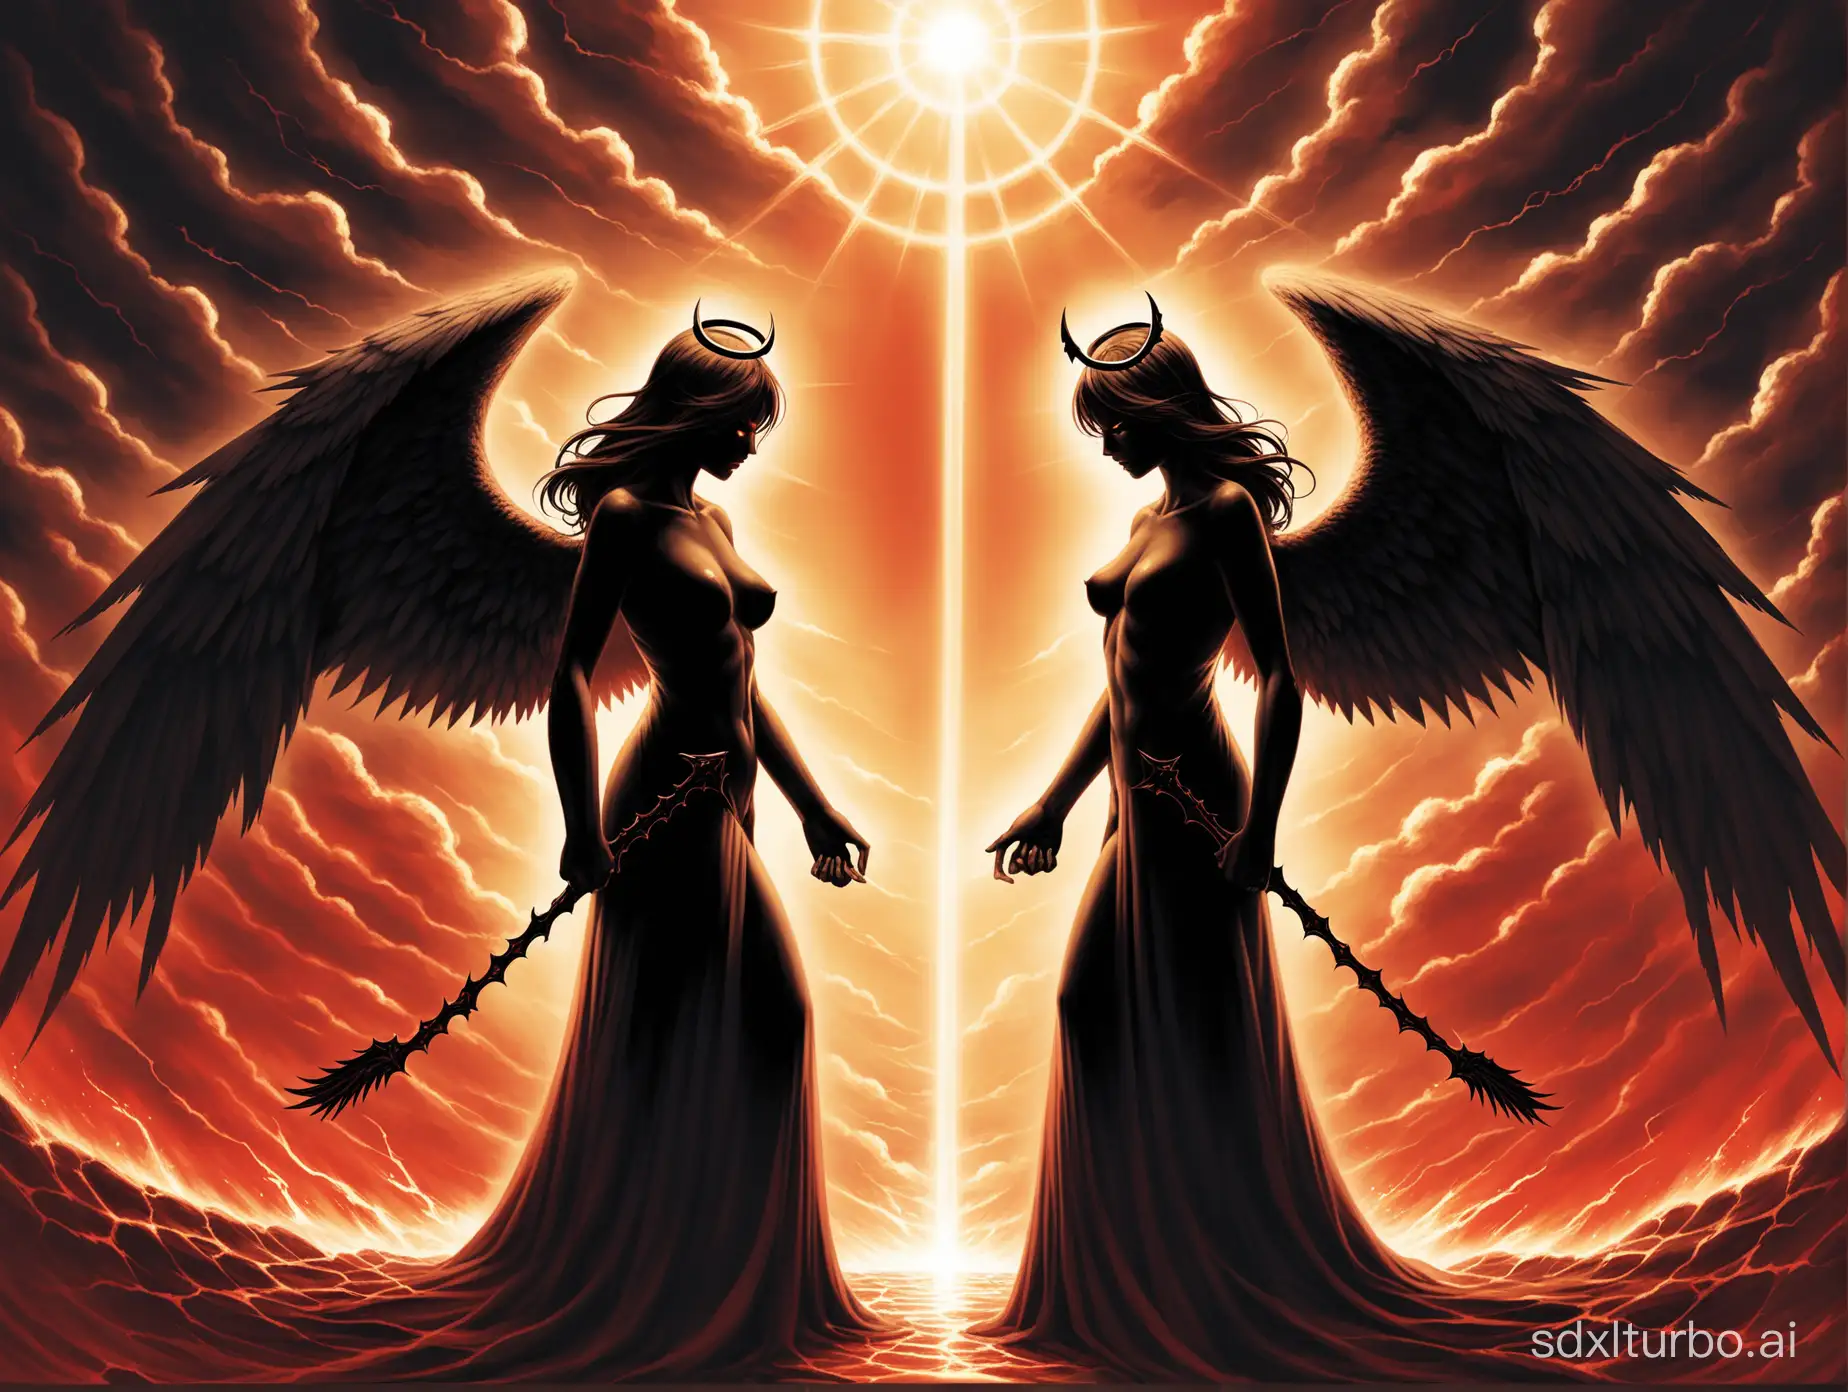 Angels-and-Demons-Confrontation-Epic-Battle-of-Light-and-Darkness